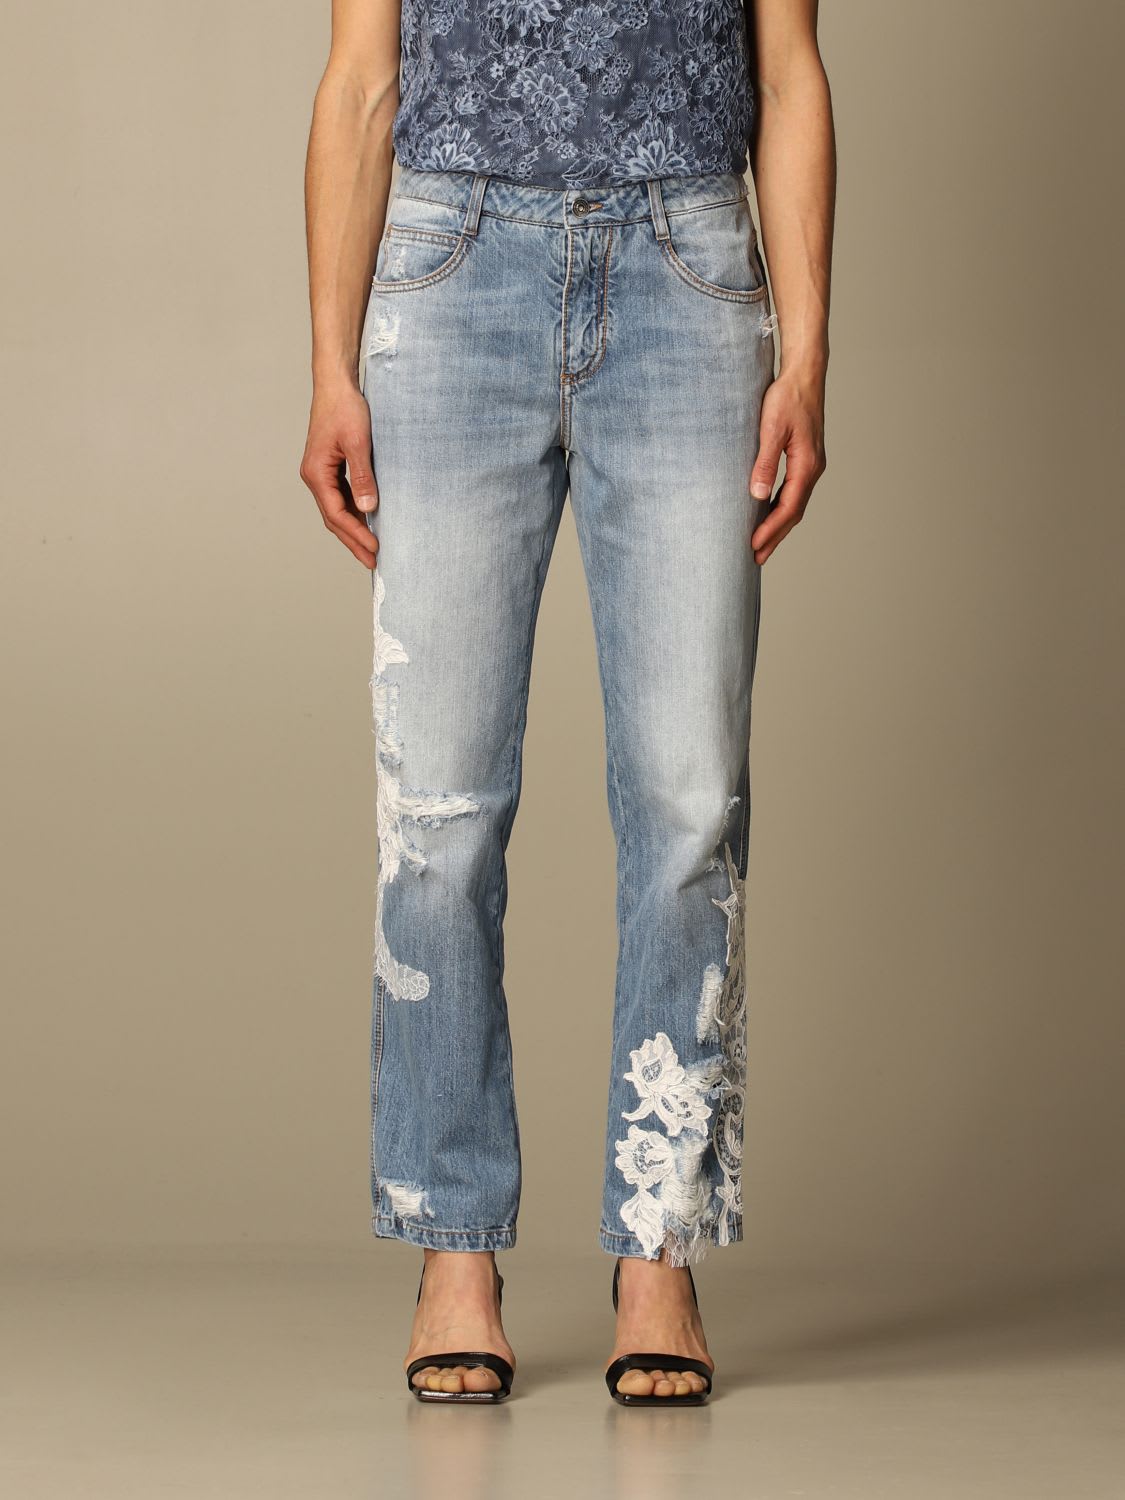 Ermanno Scervino Jeans Ermanno Scervino Jeans In Denim With Lace Inserts